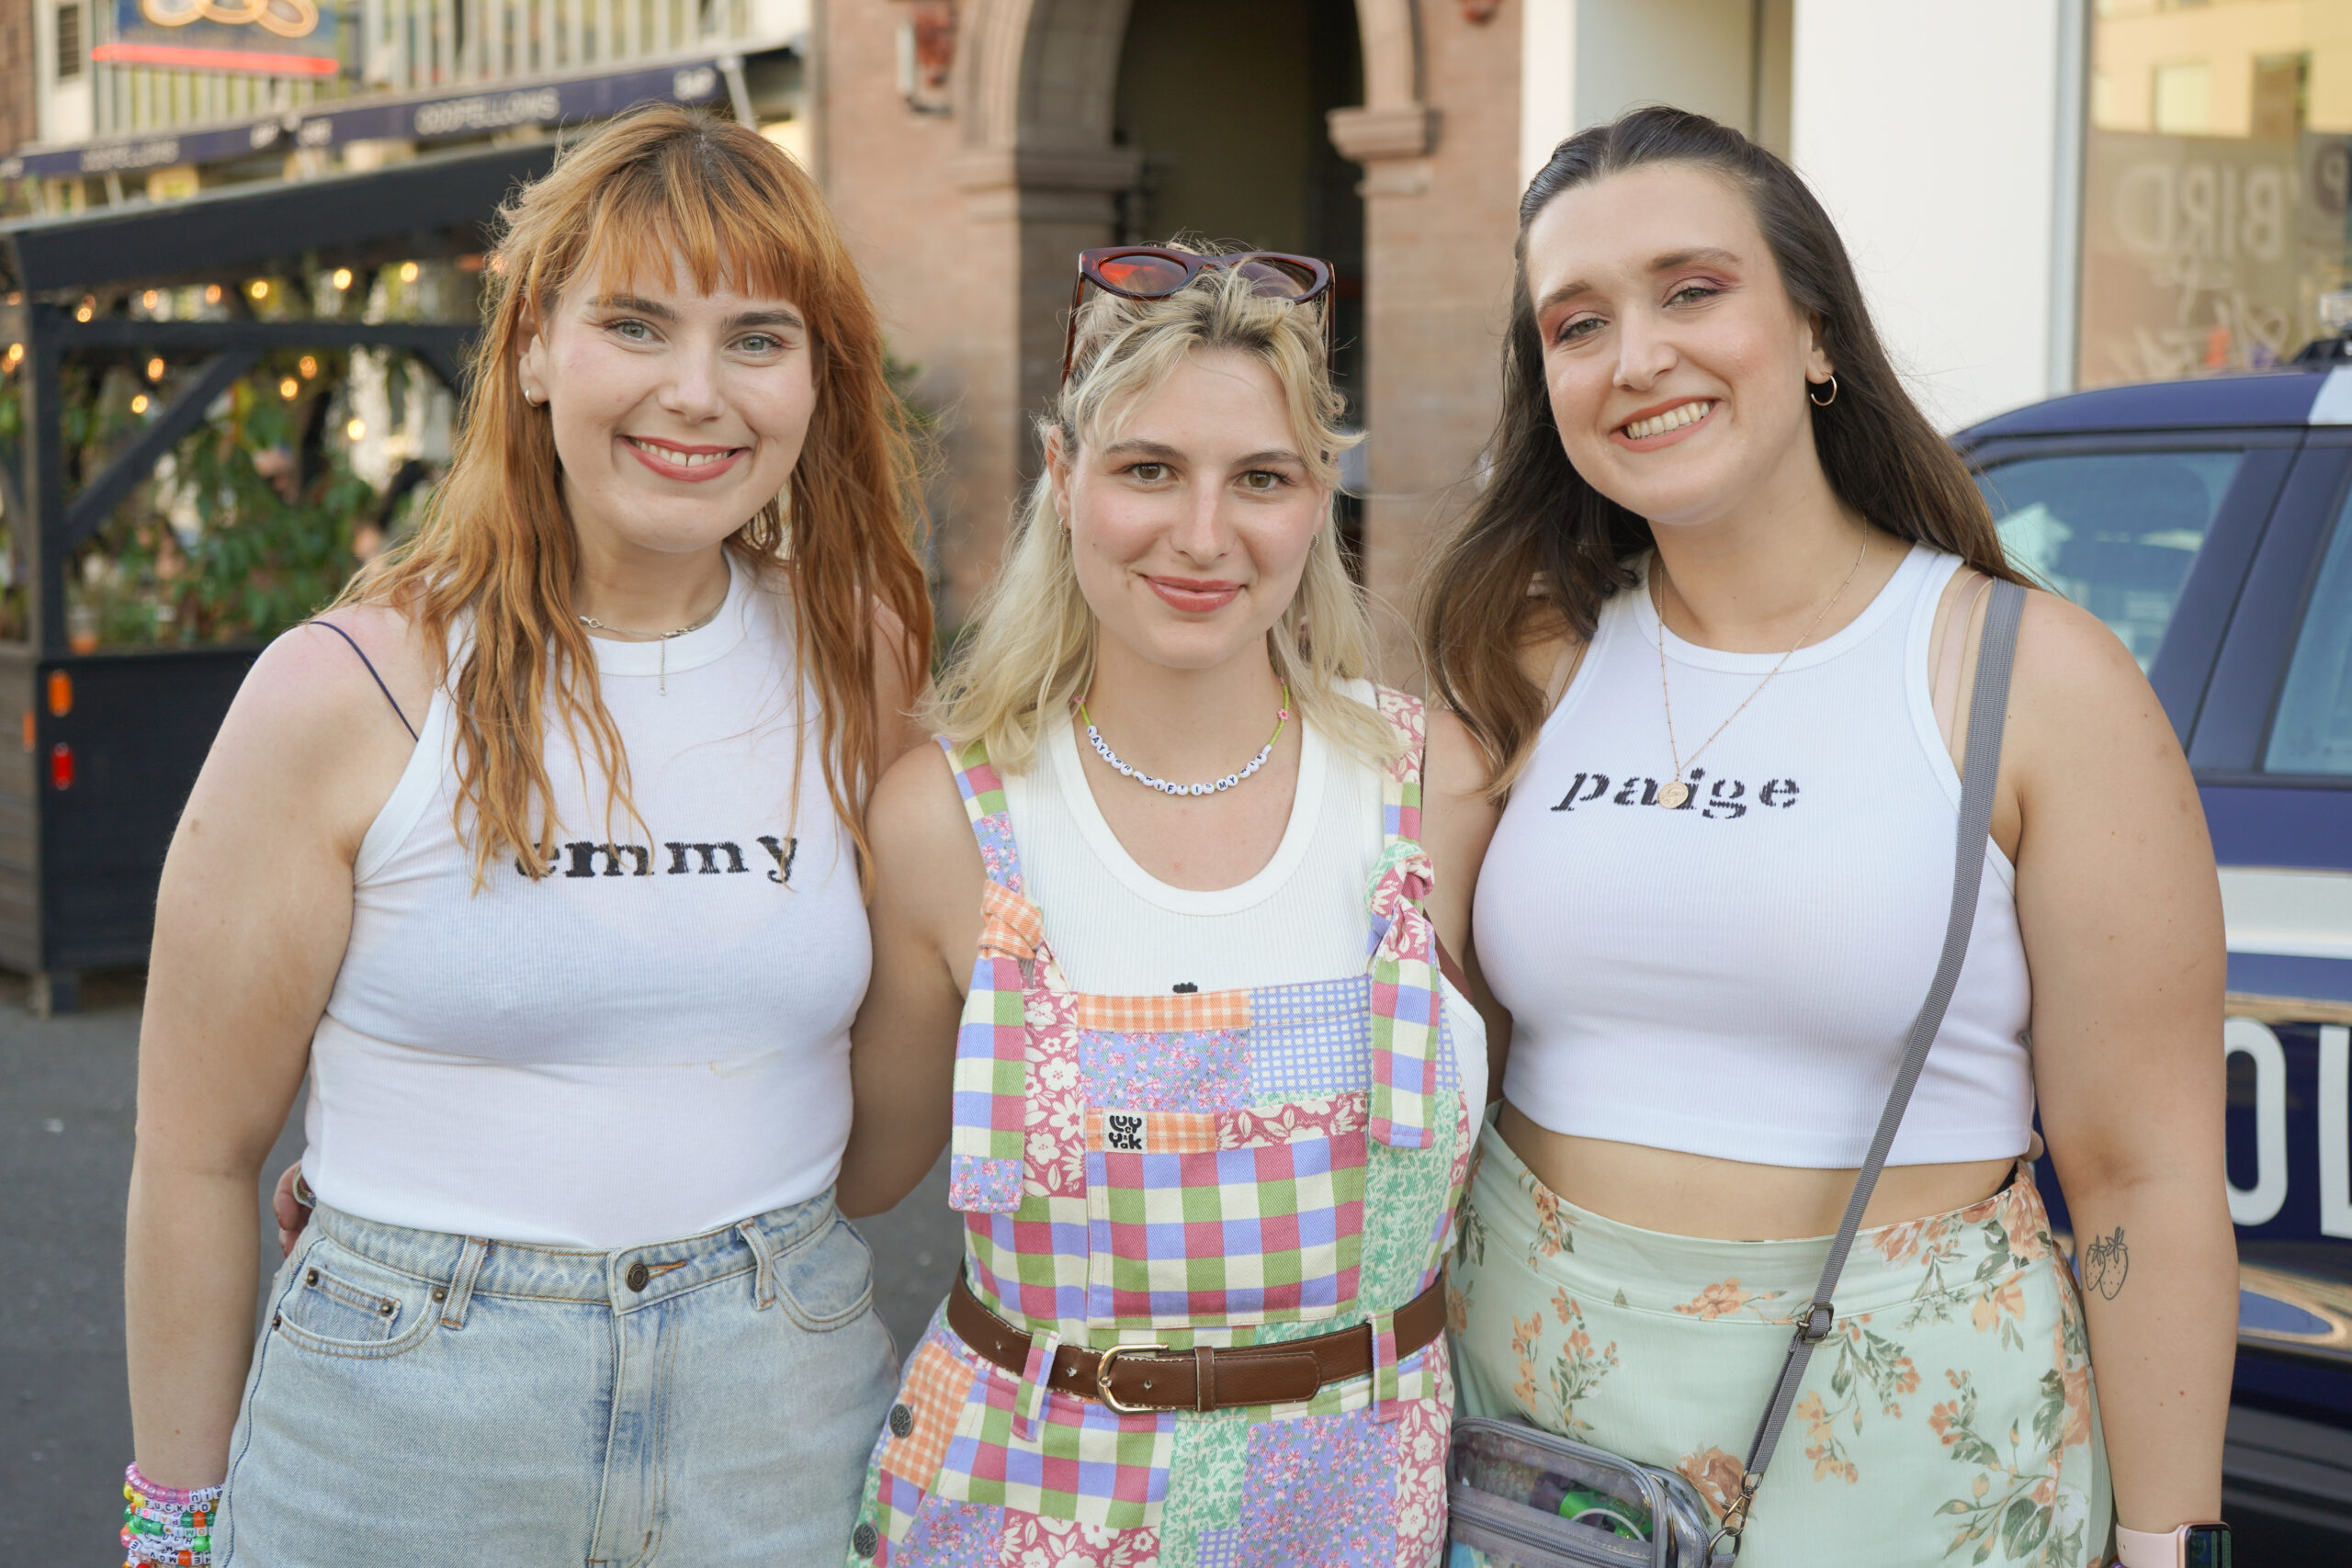 From left to right, friends Emmy Corliss, Kenzie Lundborg, and Paige Jarzabkowski on their way to see musician Muna wearing name shirts inspired by a recent Muna music video.